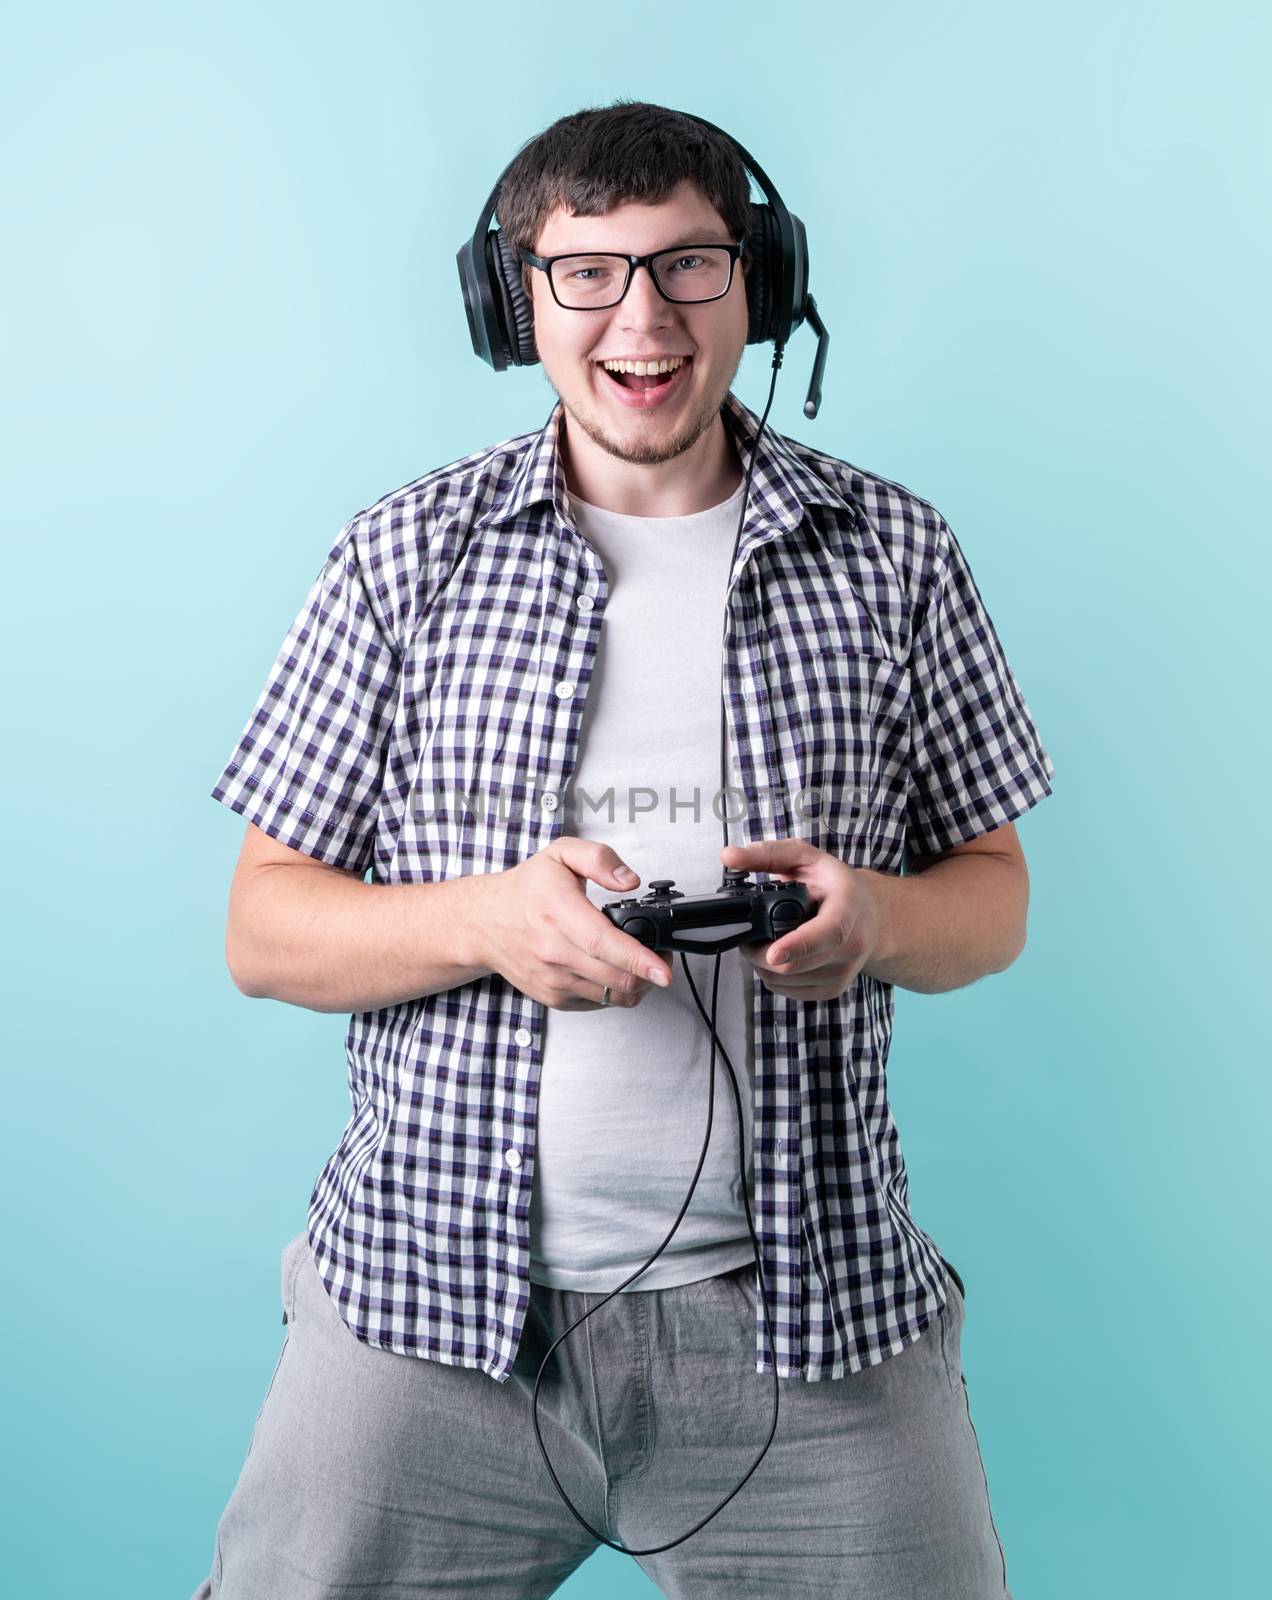 Stay home. Happy laughing young man playing video games holding a joystick isolated on blue background